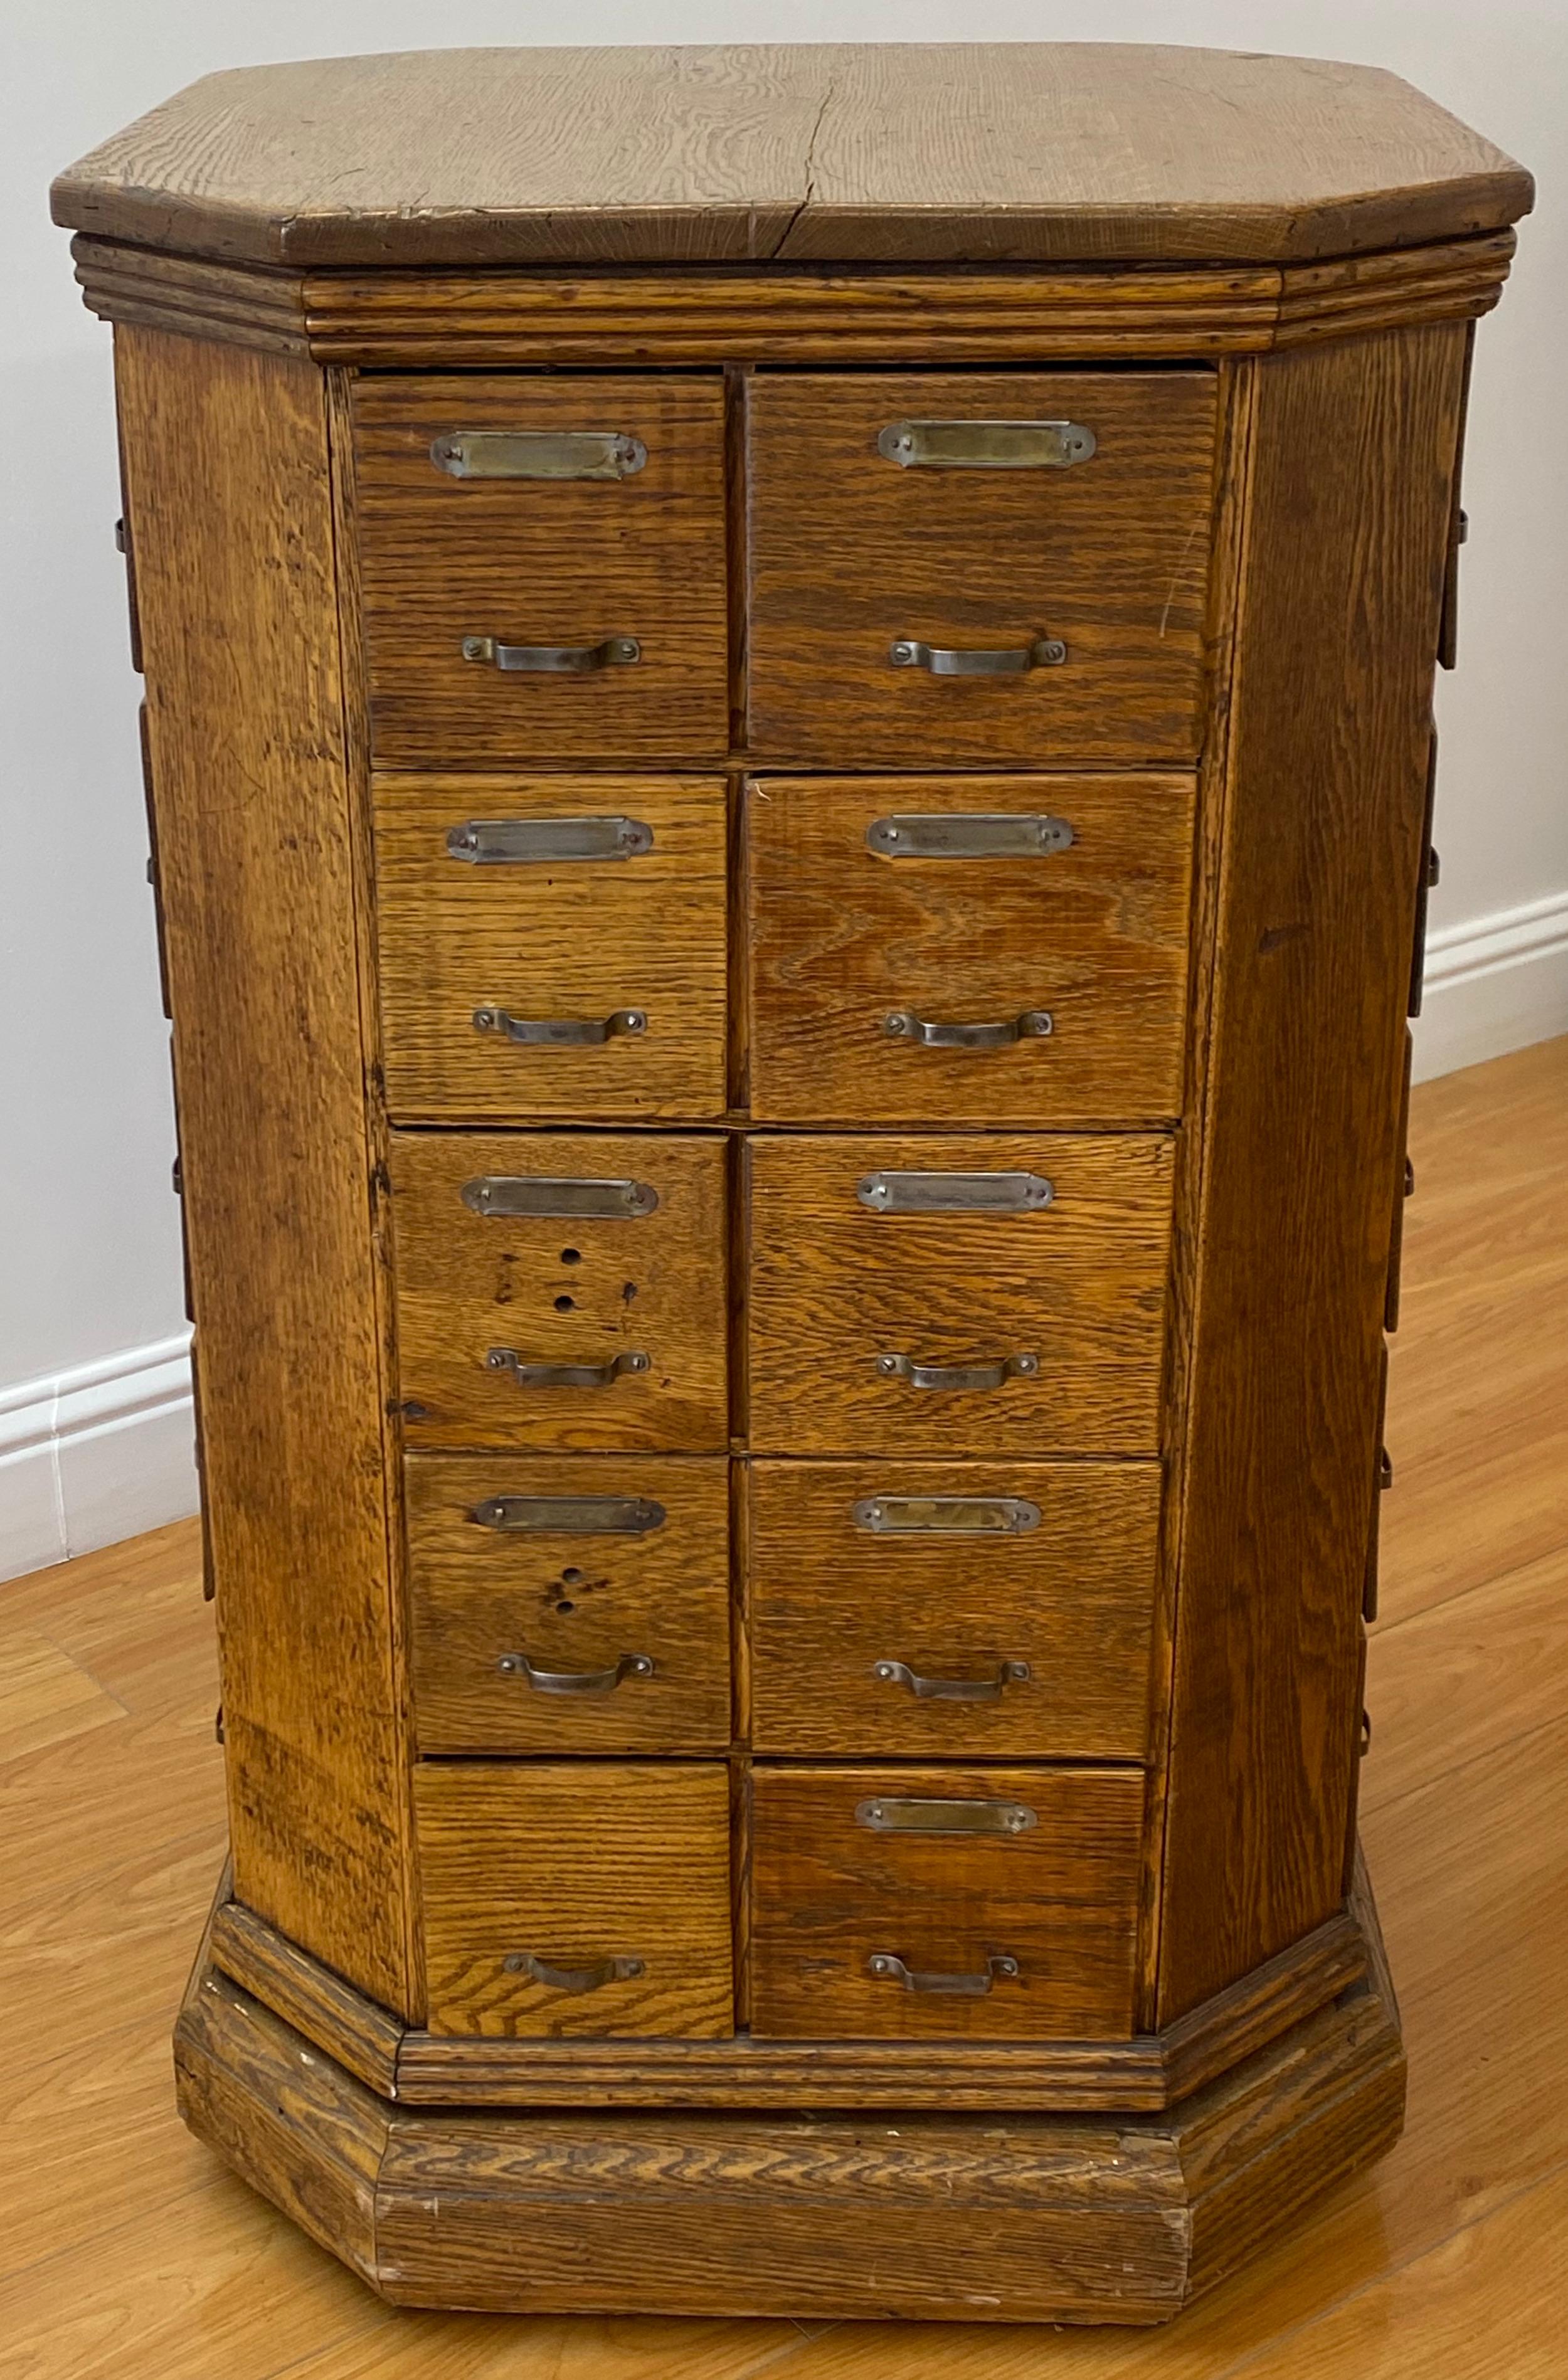 Early 20th century Tennessee oak hardware cabinet, circa 1910

American antique hardware cabinet by A.R. Brown of Erwin, Tennessee

Measures: 24